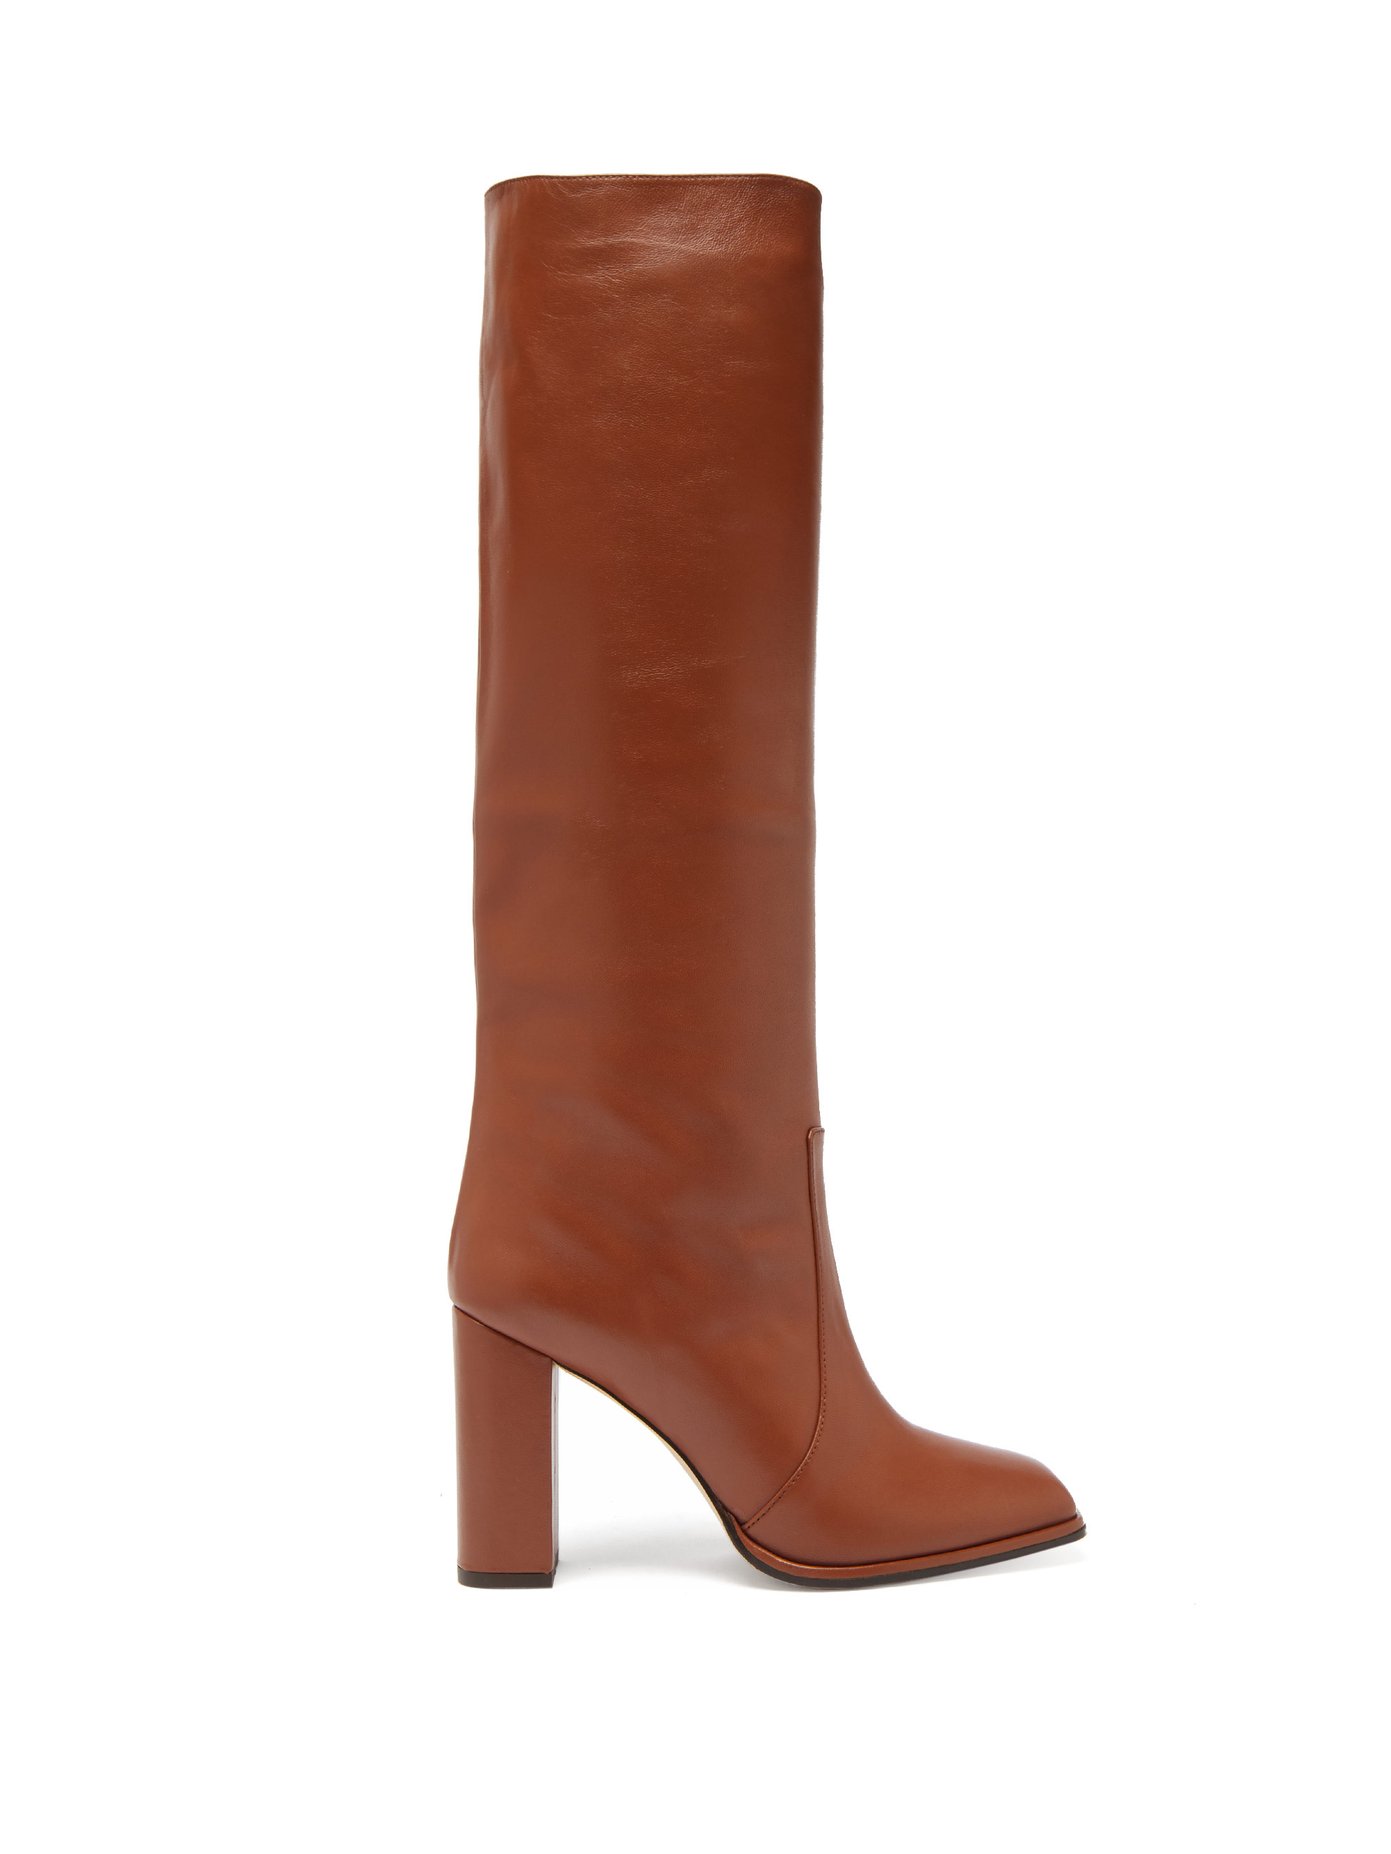 knee high leather boots uk